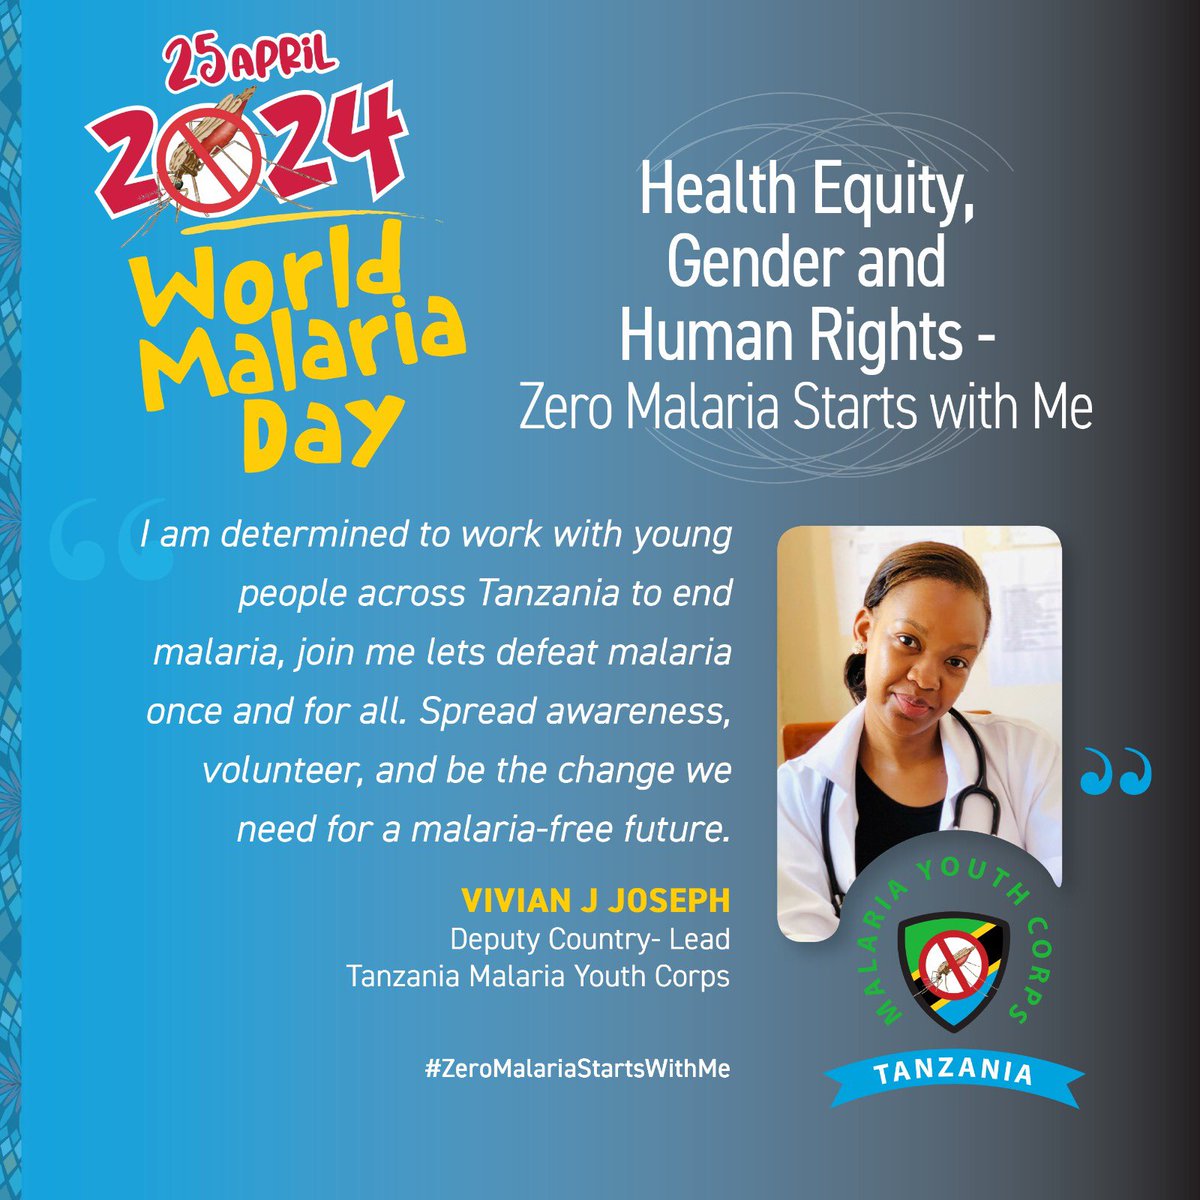 To mark World Malaria Day 2024 We are proud to have strong commitment from our deputy country lead @vivian_j_joseph who also leads the @SAYoF_SADC - let’s take action to #EndMalaria 🚫🦟 @ummymwalimu @wizara_afyatz #Tabora #Tanzania